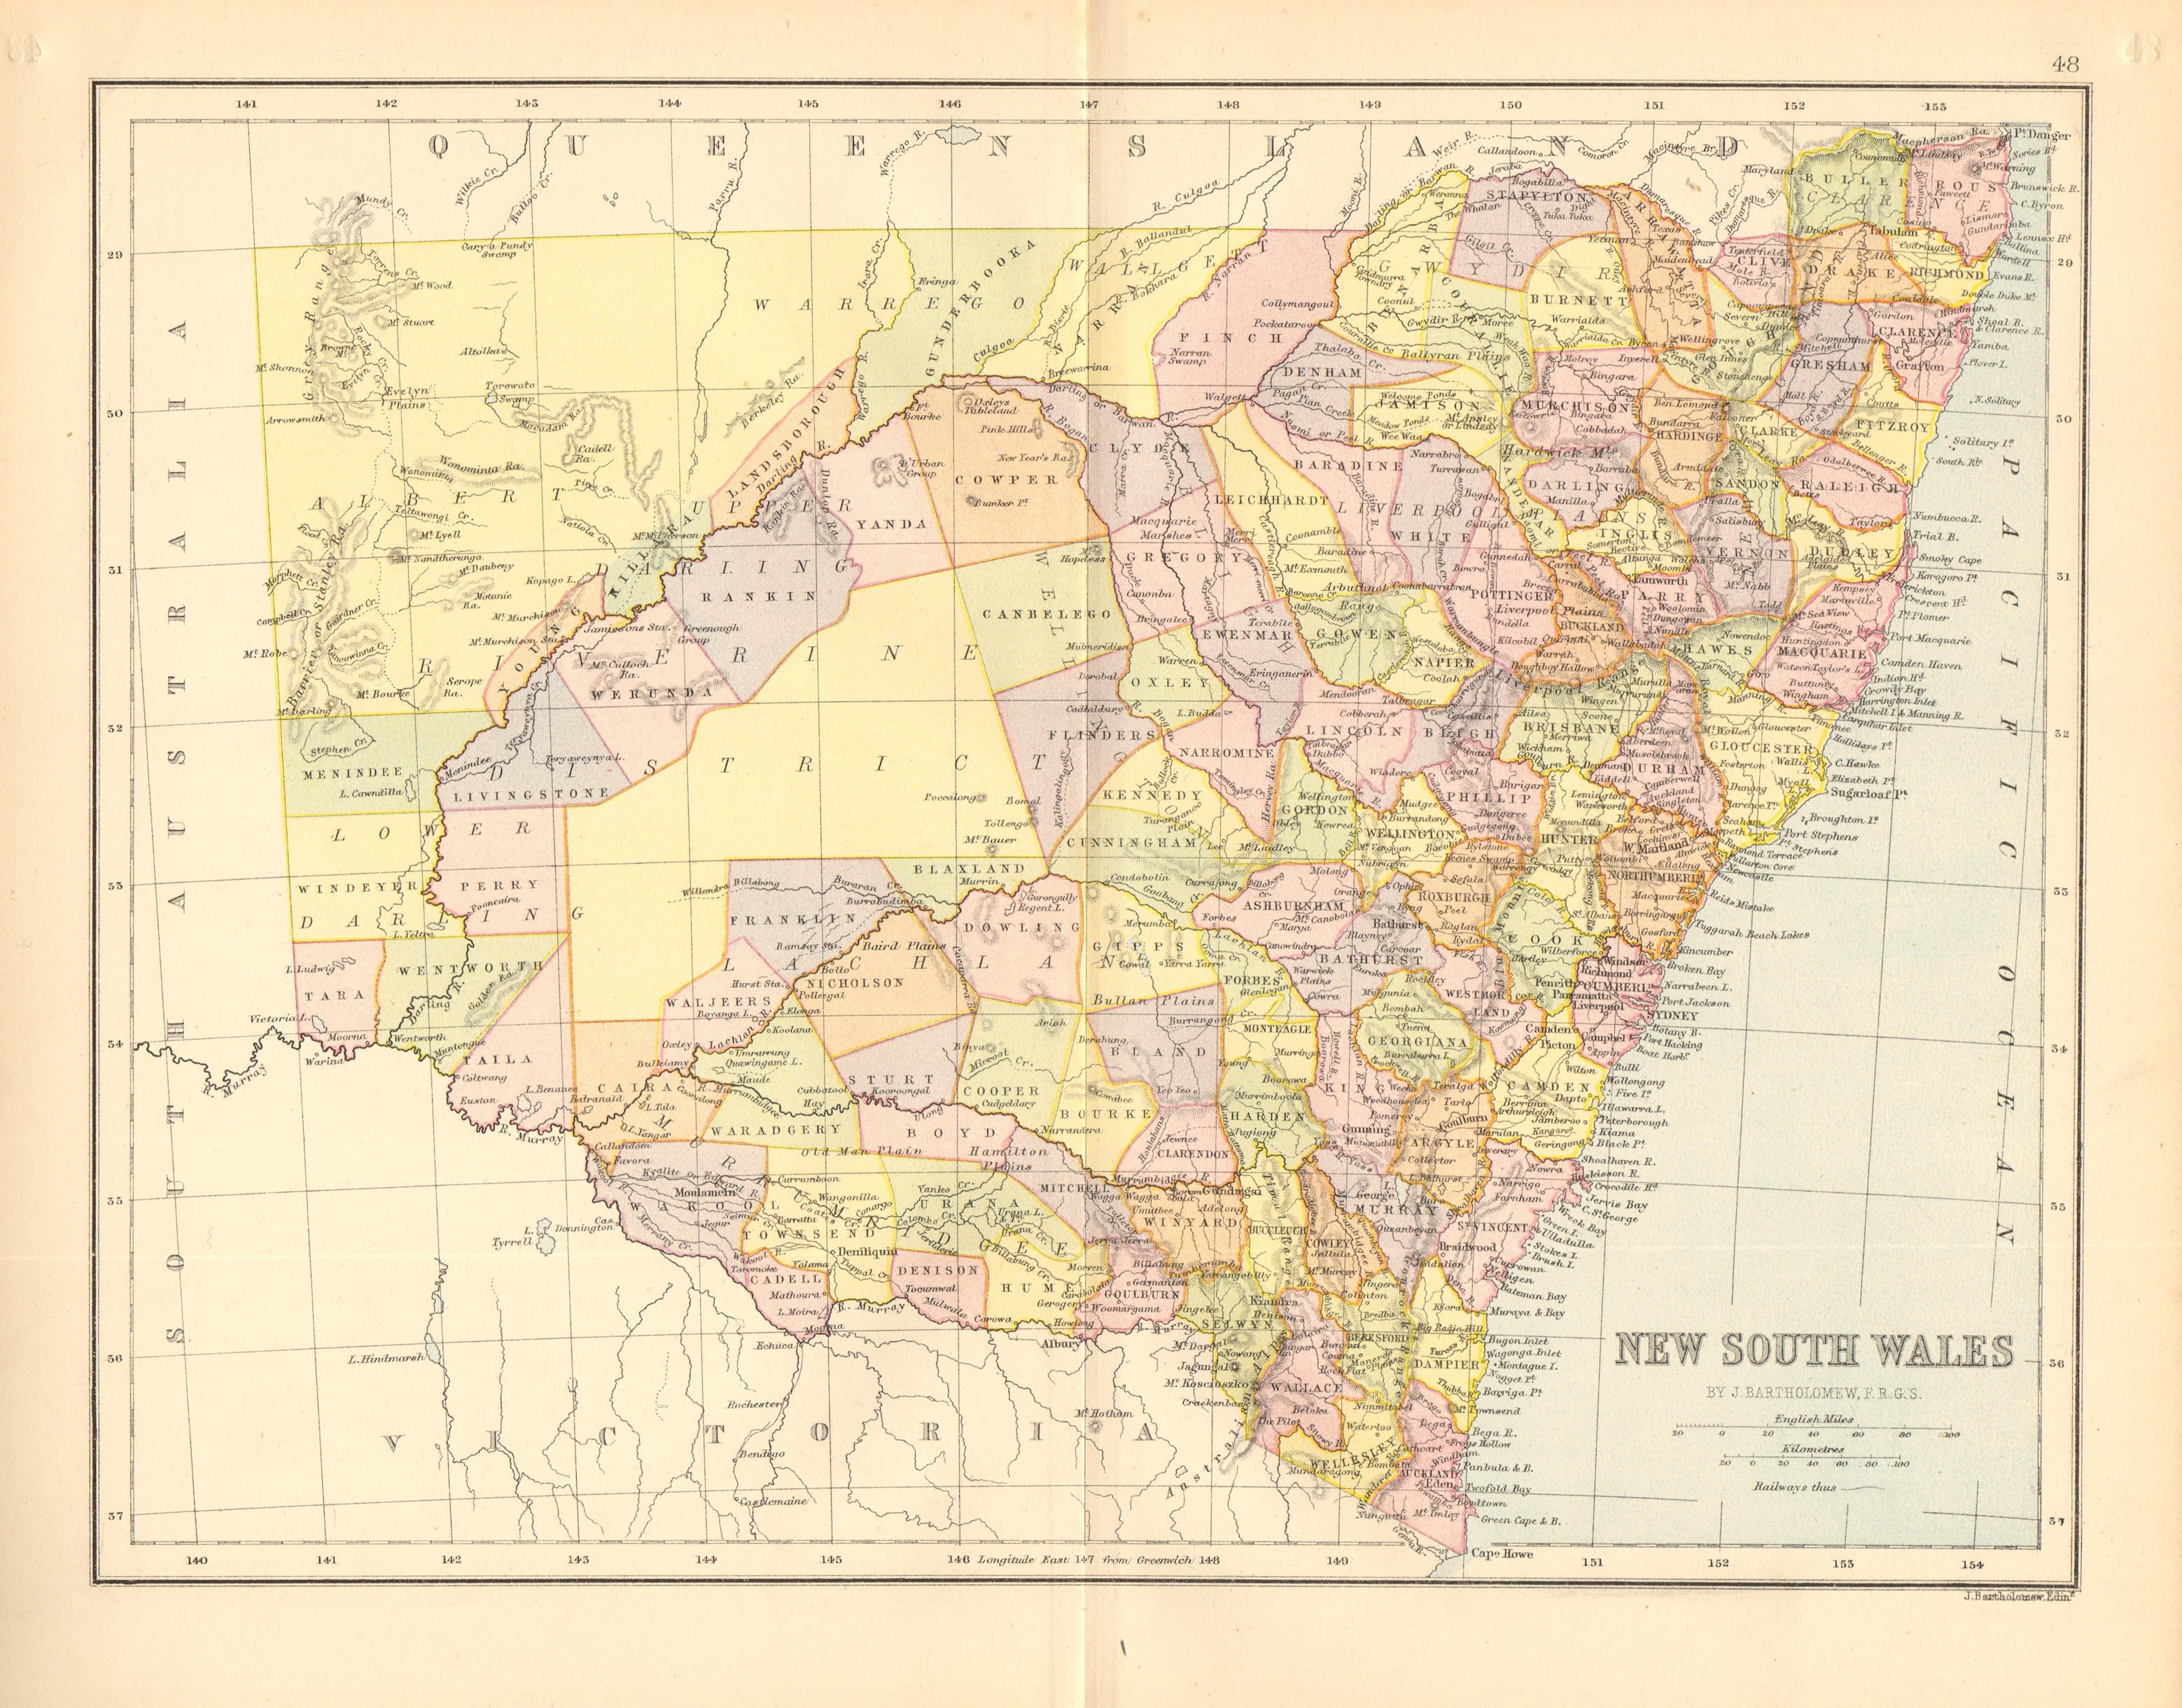 NEW SOUTH WALES. State map. Shows counties/districts/railways. Australia 1876